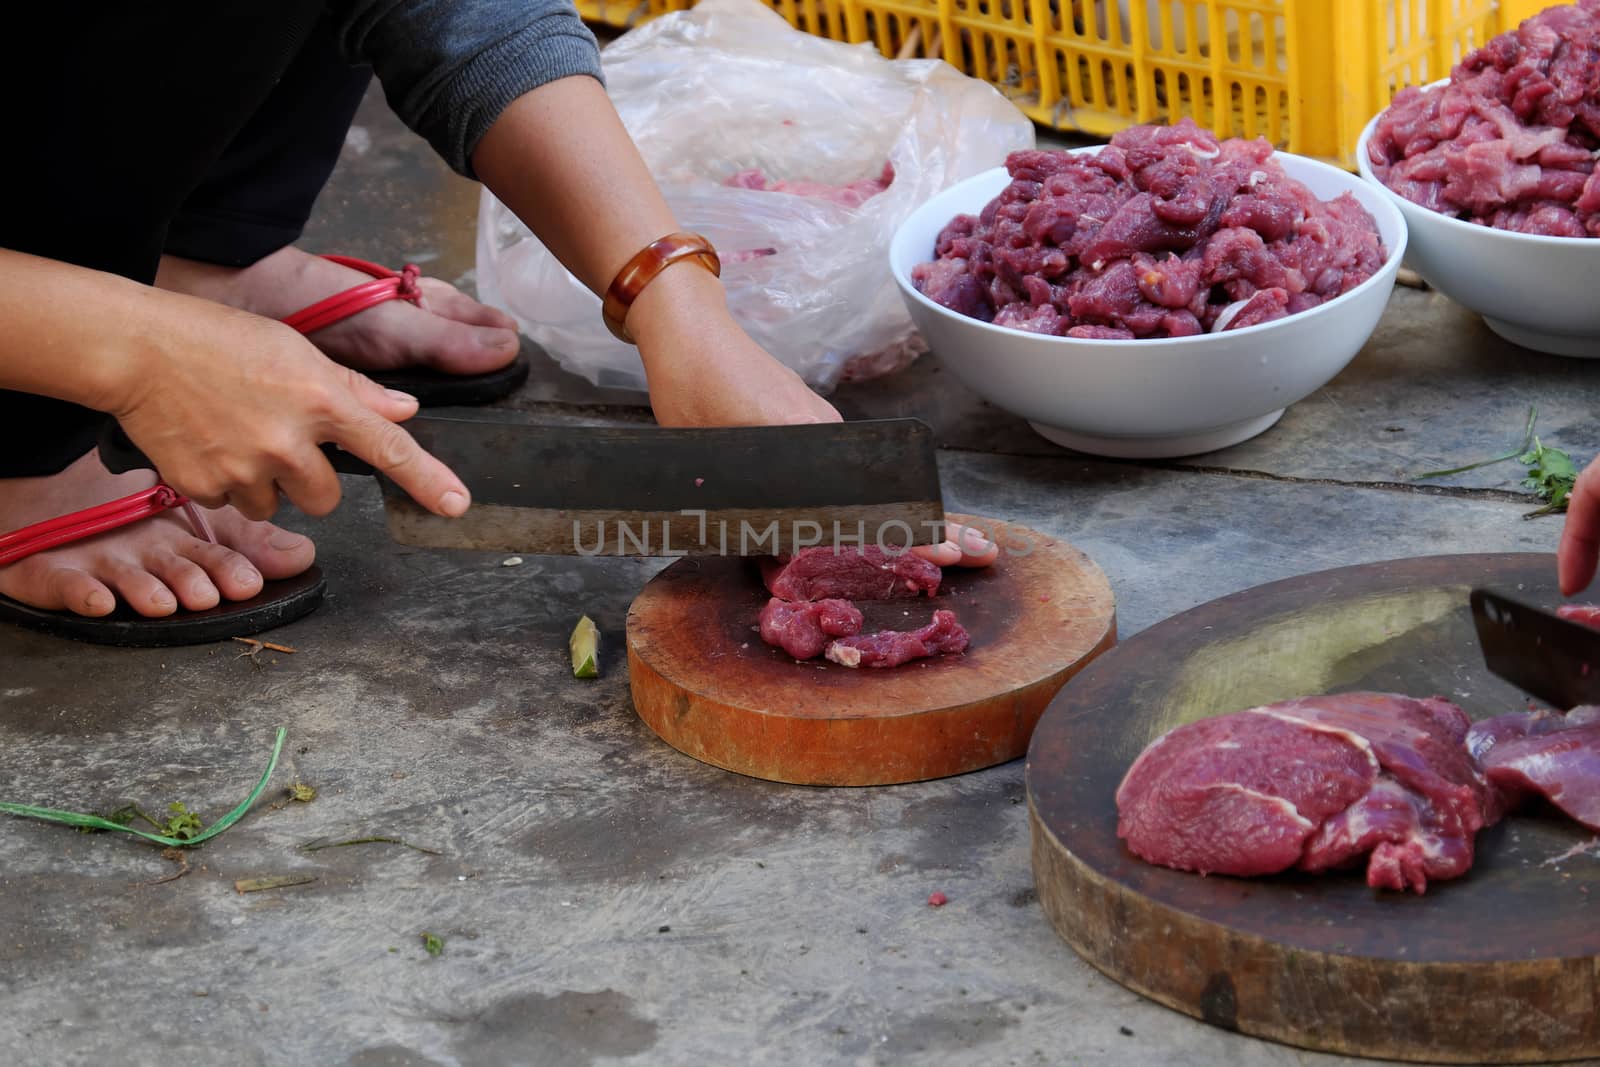 Two people cut beef meat on chopping board with food safety not good, woman sit on dirty floor and process food